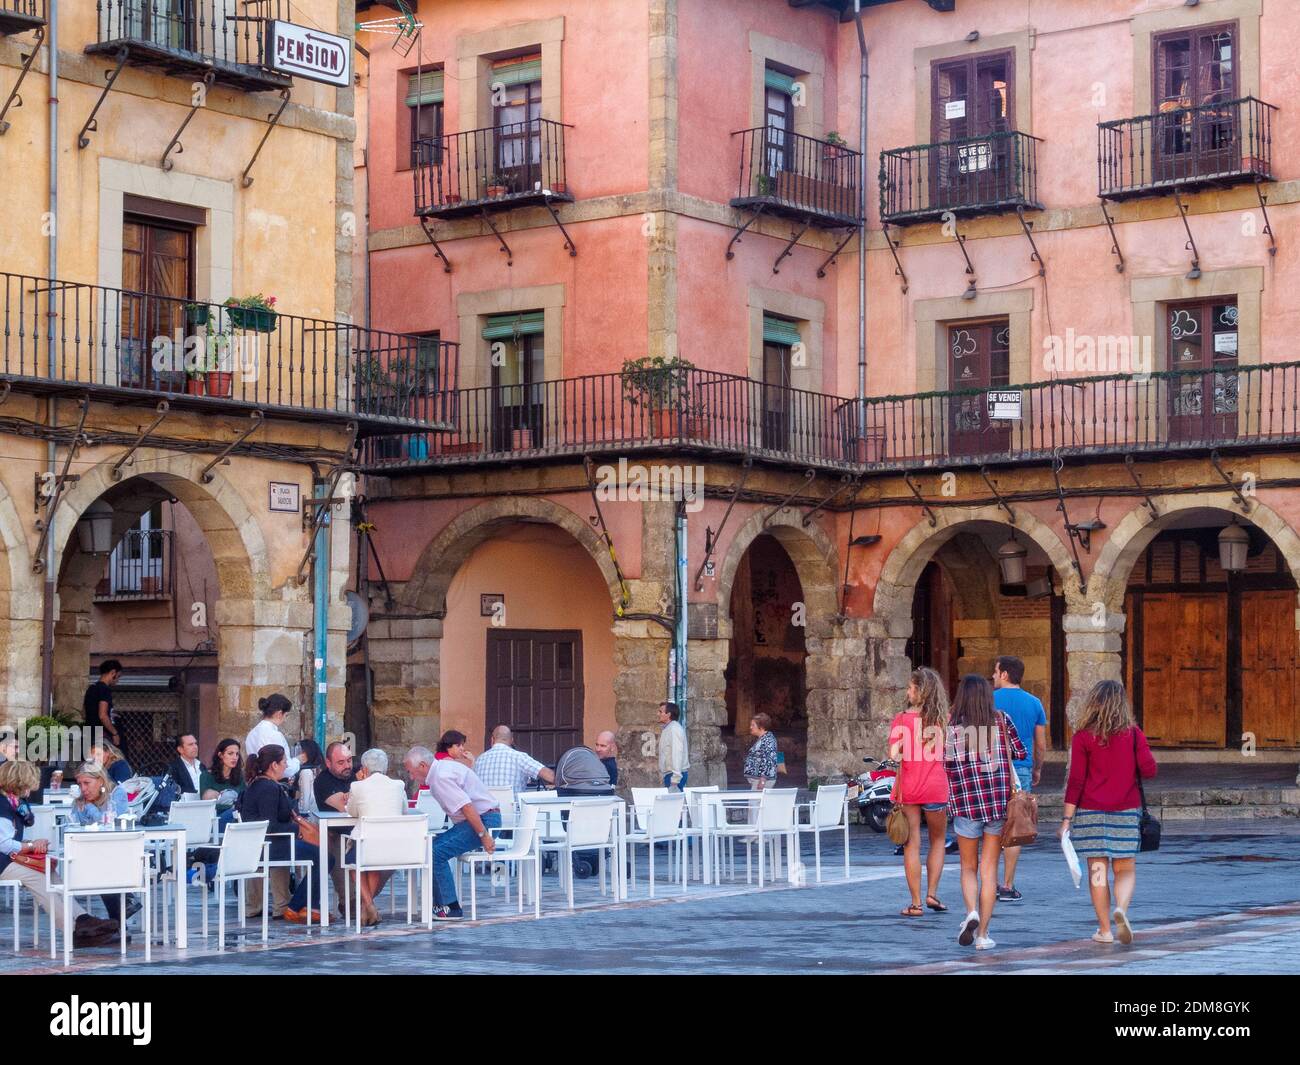 One of the charming corners of the Main Square (Plaza Mayor) - Leon, Castile and Leon, Spain Stock Photo